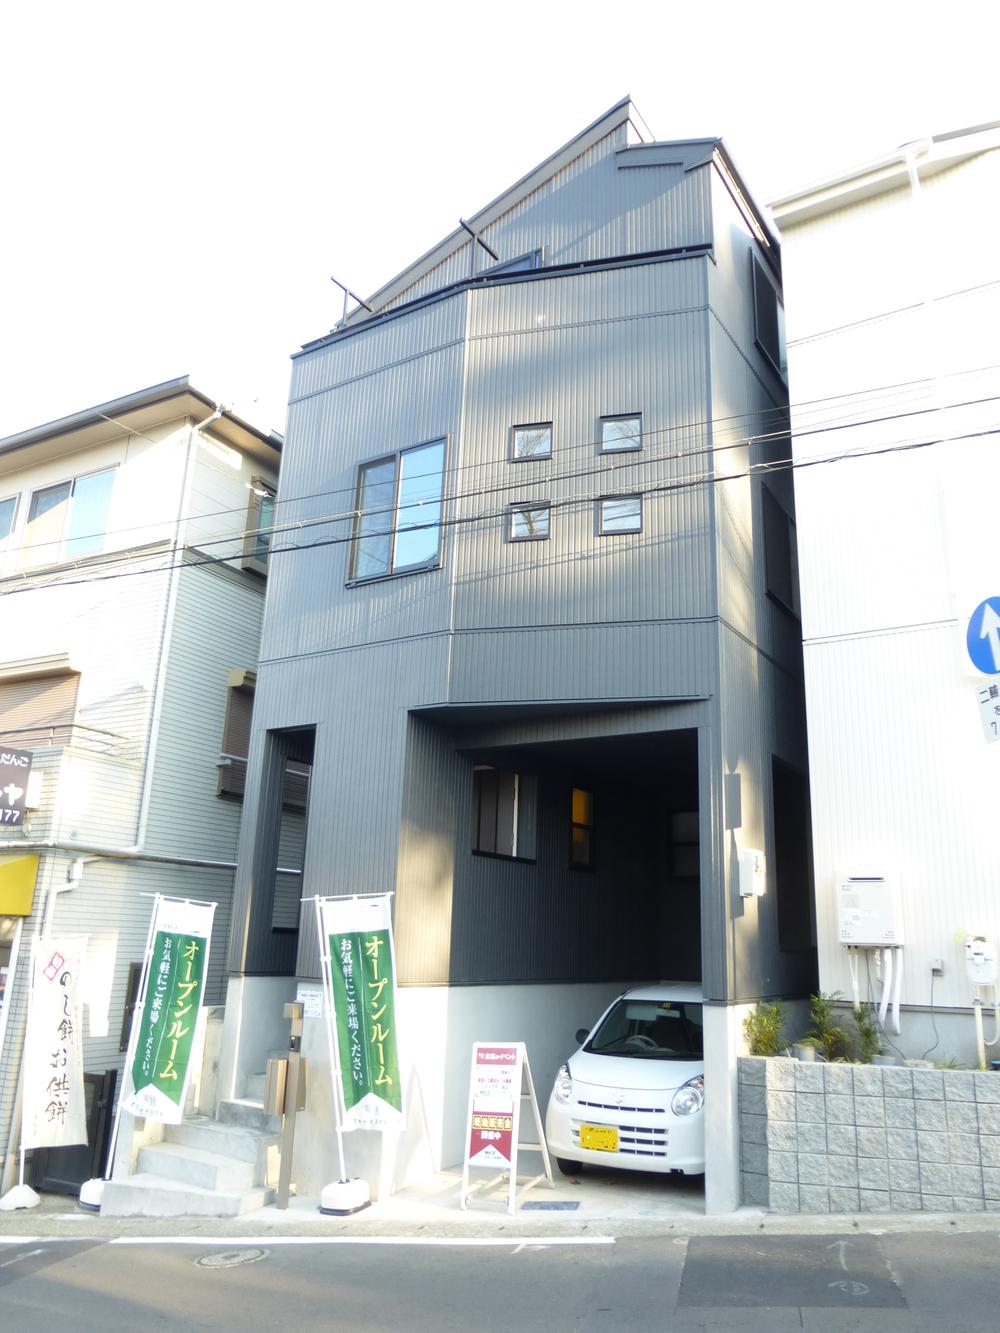 Local appearance photo. Local (December 15, 2013) Shooting Othello House Minamikibogaoka, The rest 1 building!